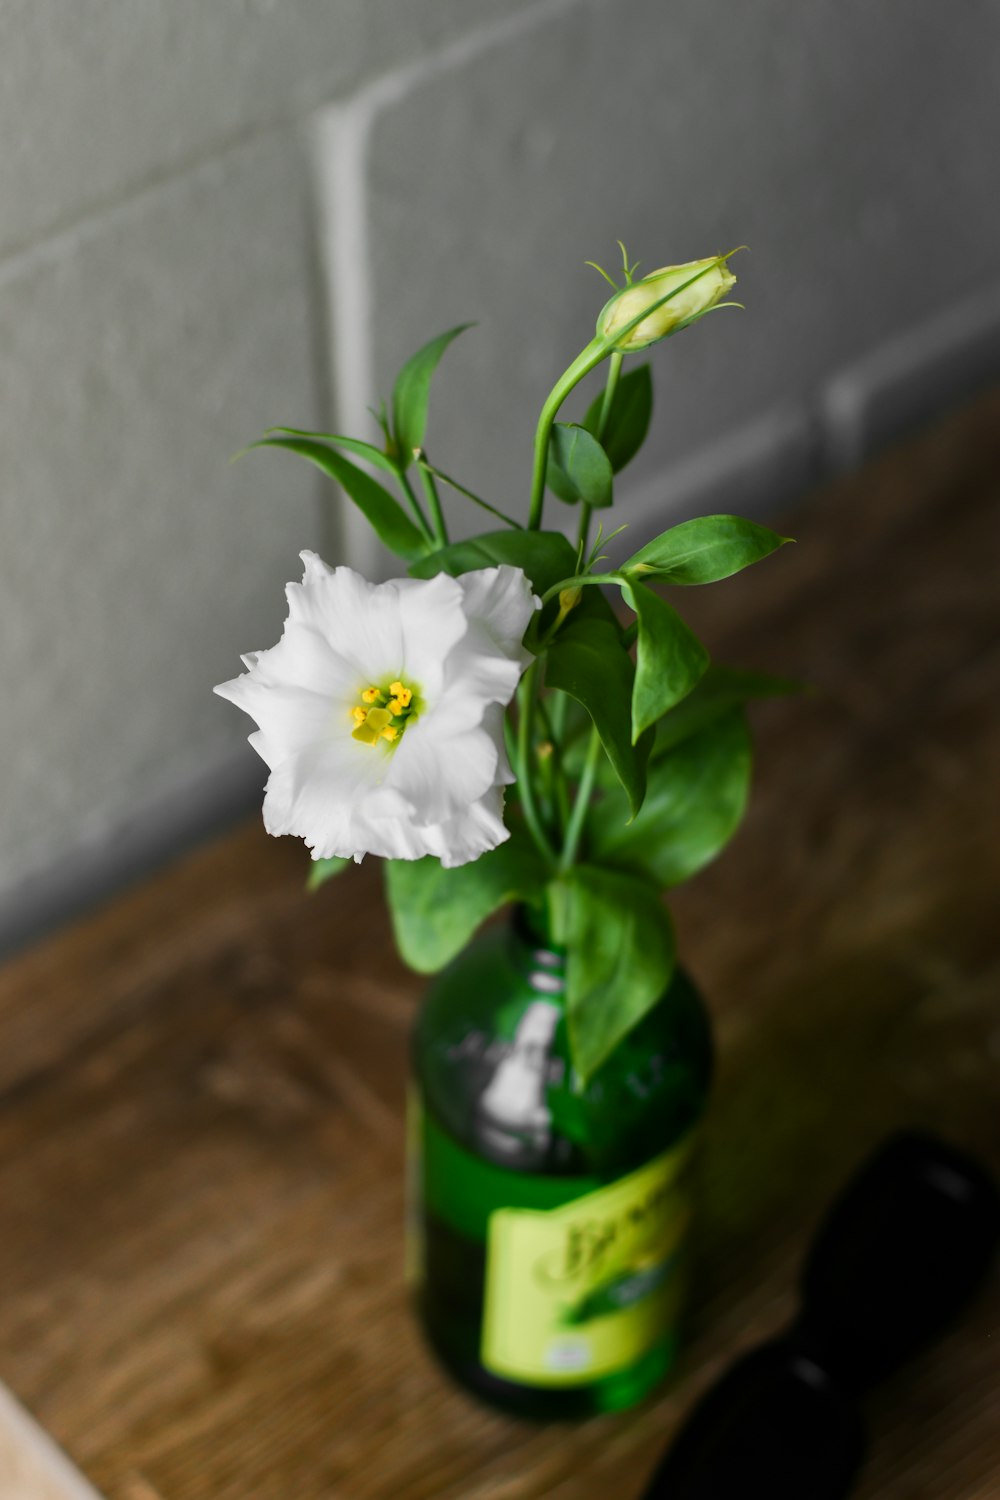 a white flower in a green bottle on a wooden table